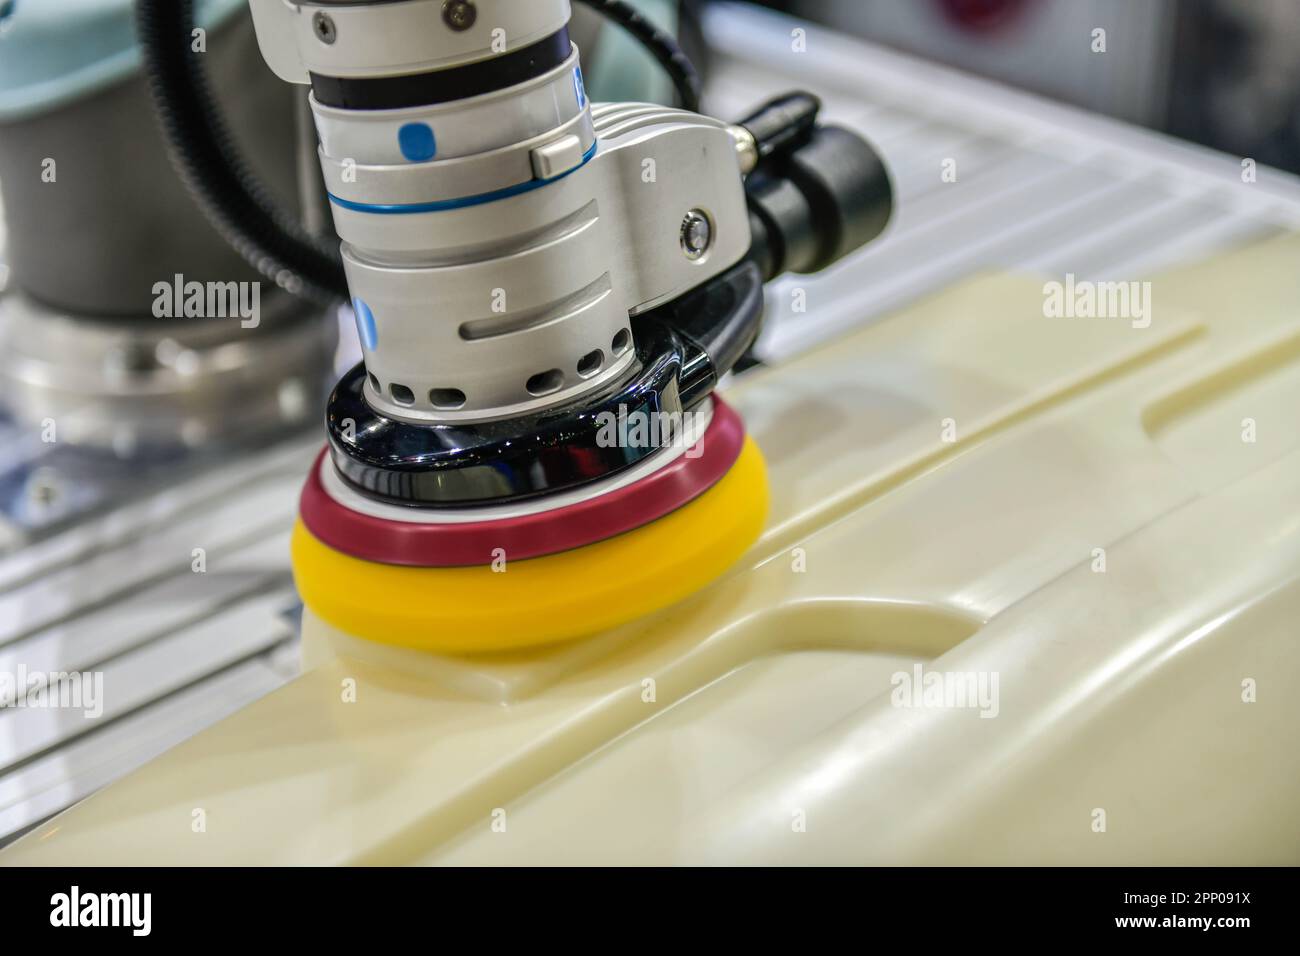 Robotic arm polishing the automotive car part in the production line. Stock Photo